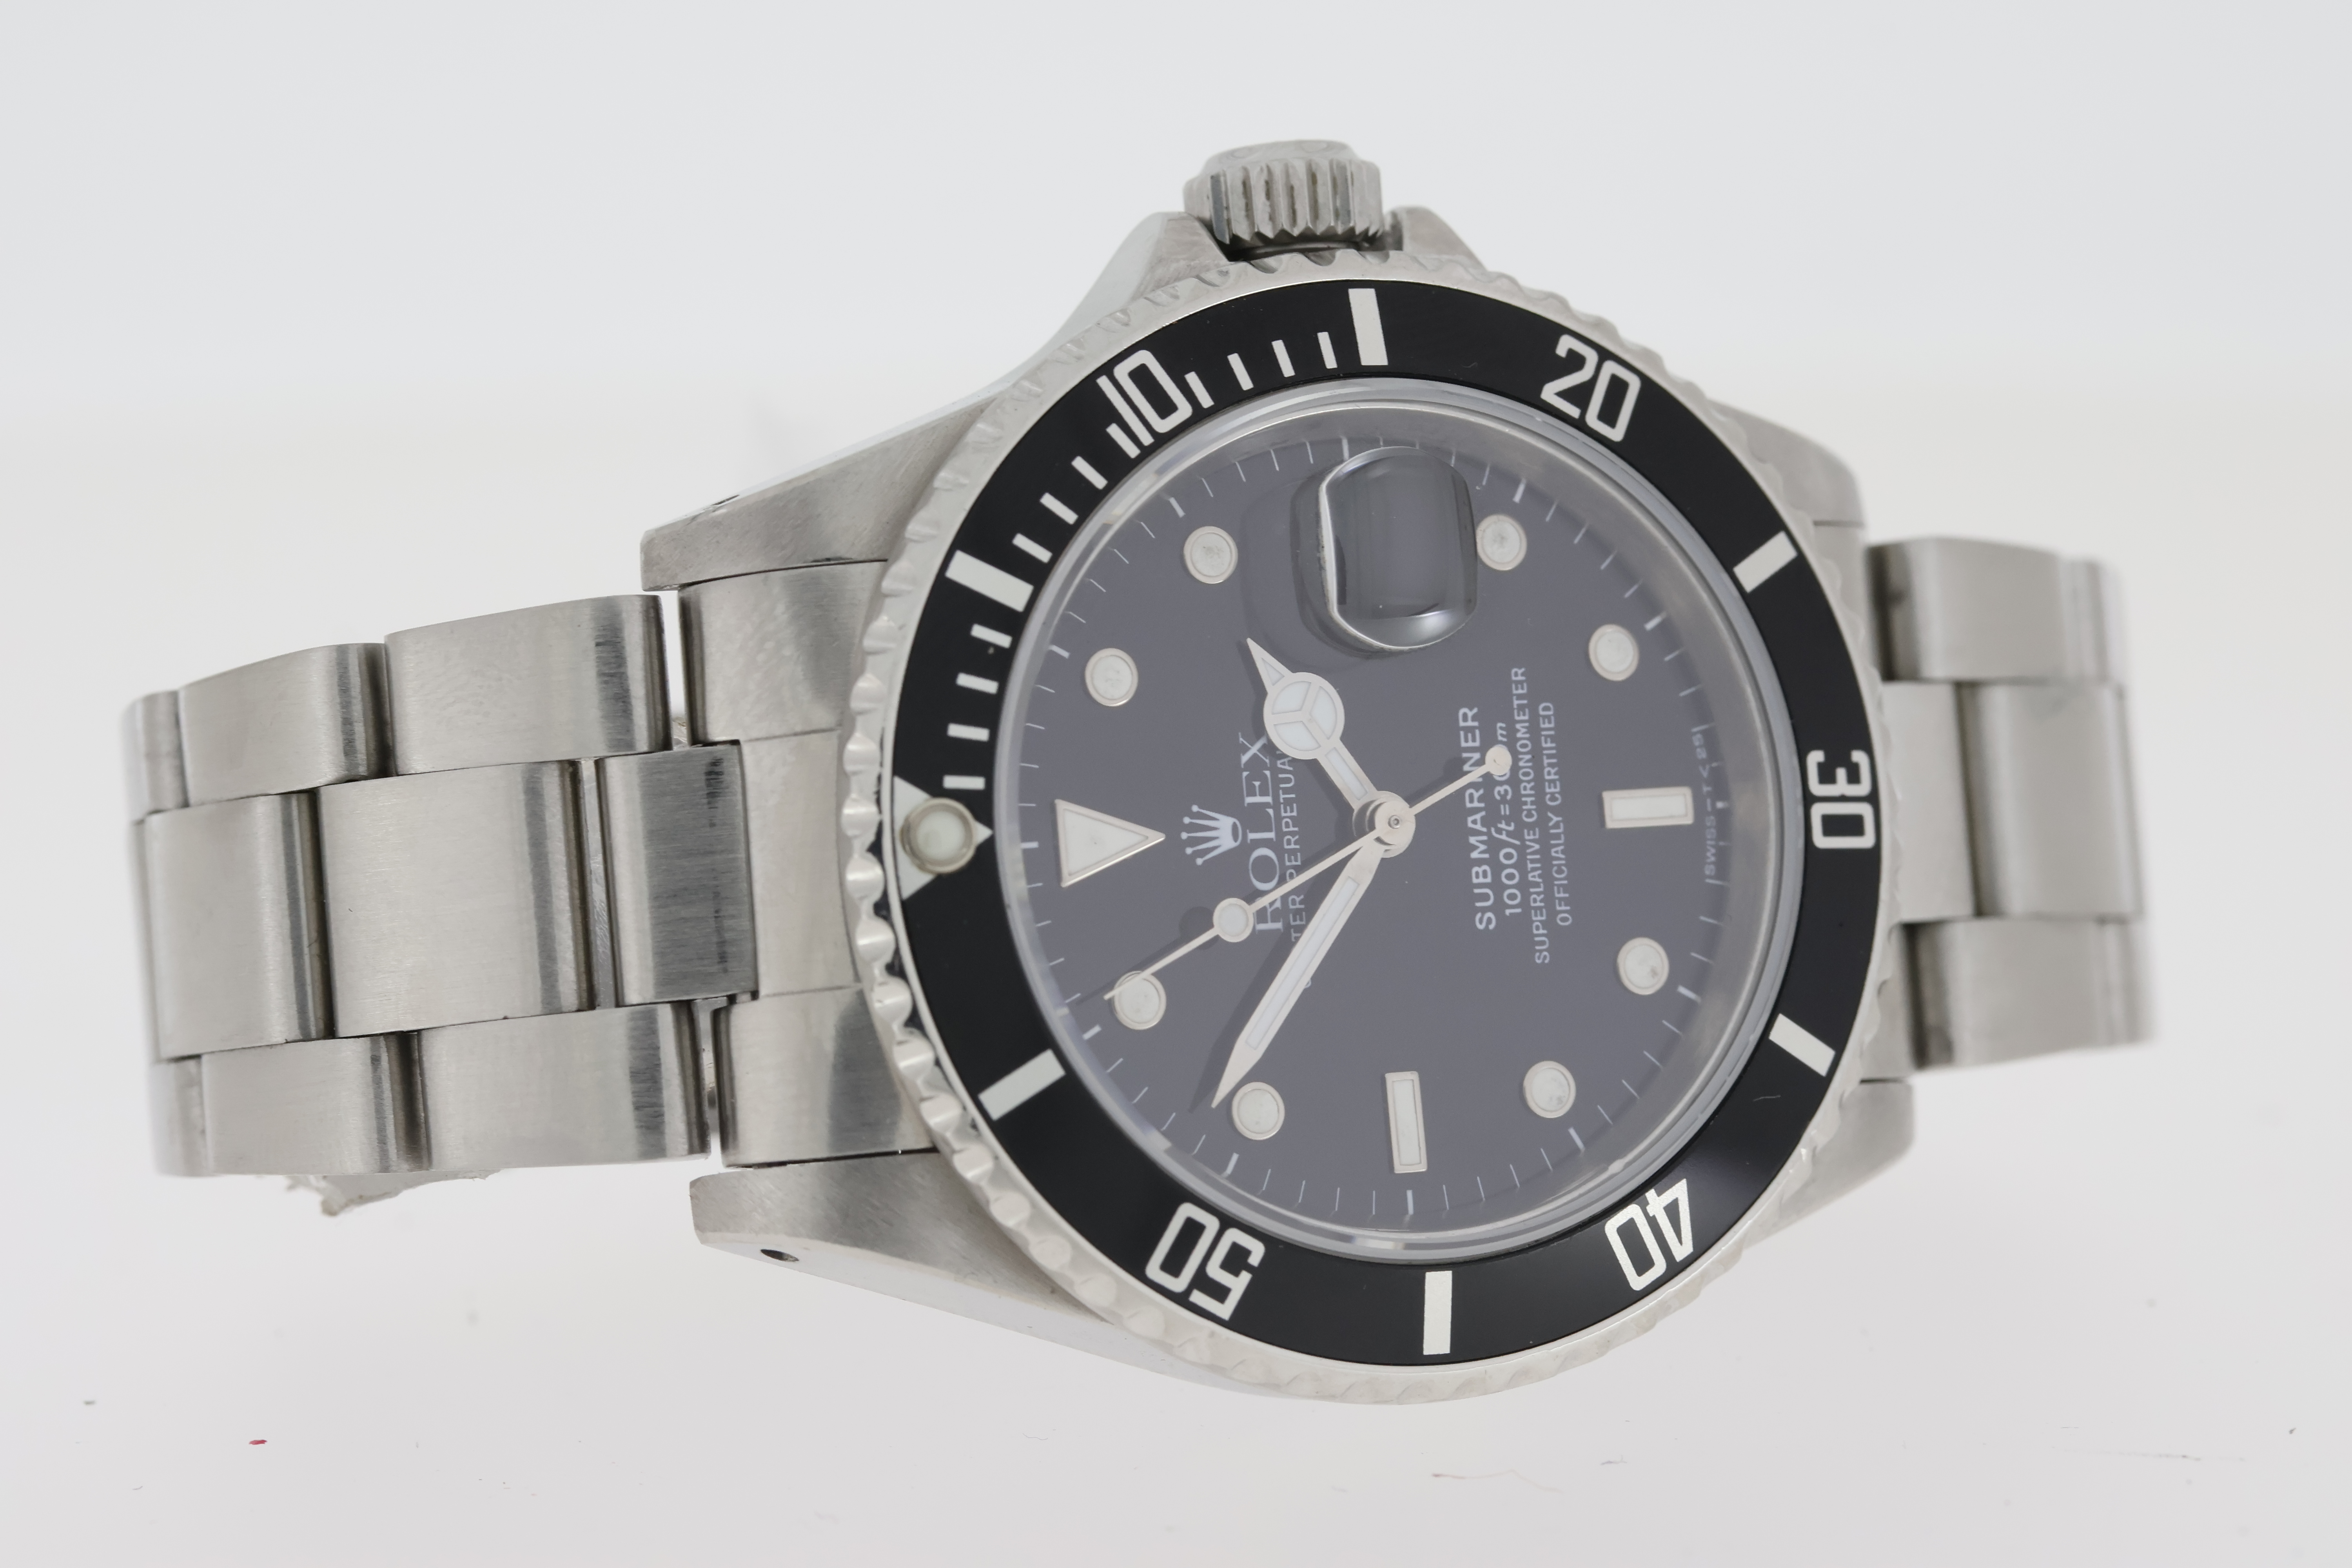 Rolex Submariner Date Reference 16610 With Papers 1990 - Image 4 of 6